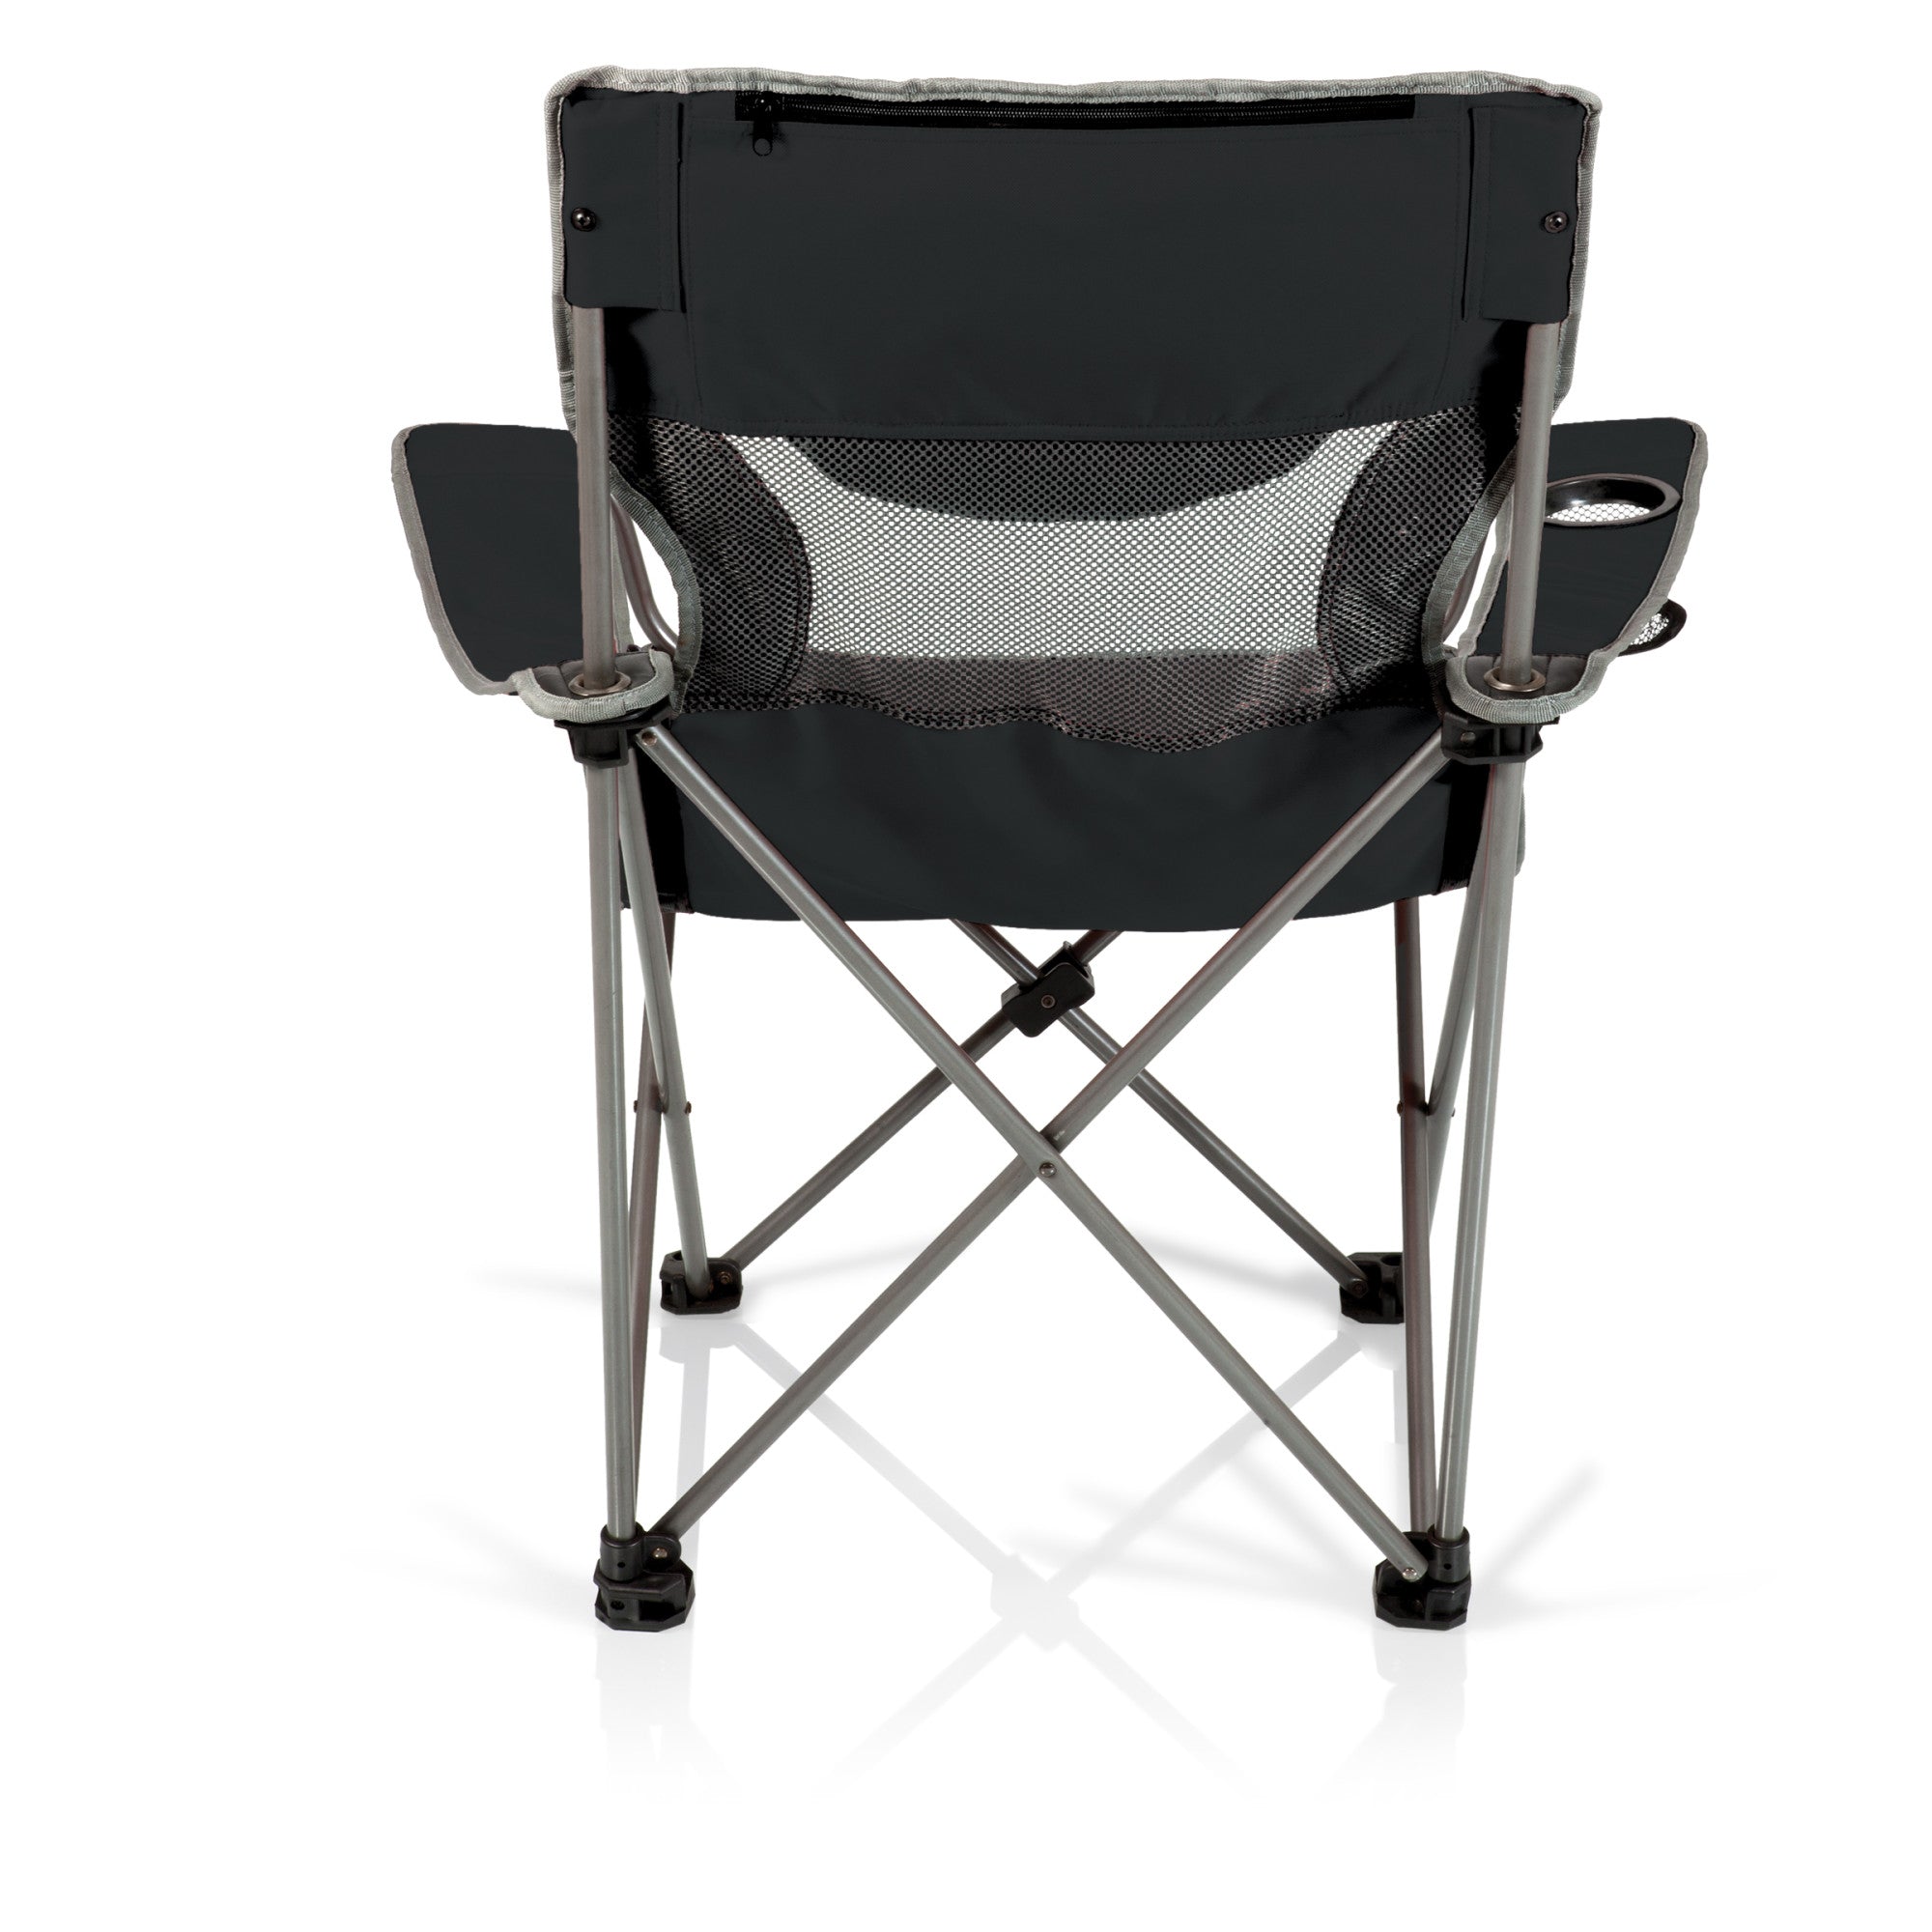 Boise State Broncos - Campsite Camp Chair